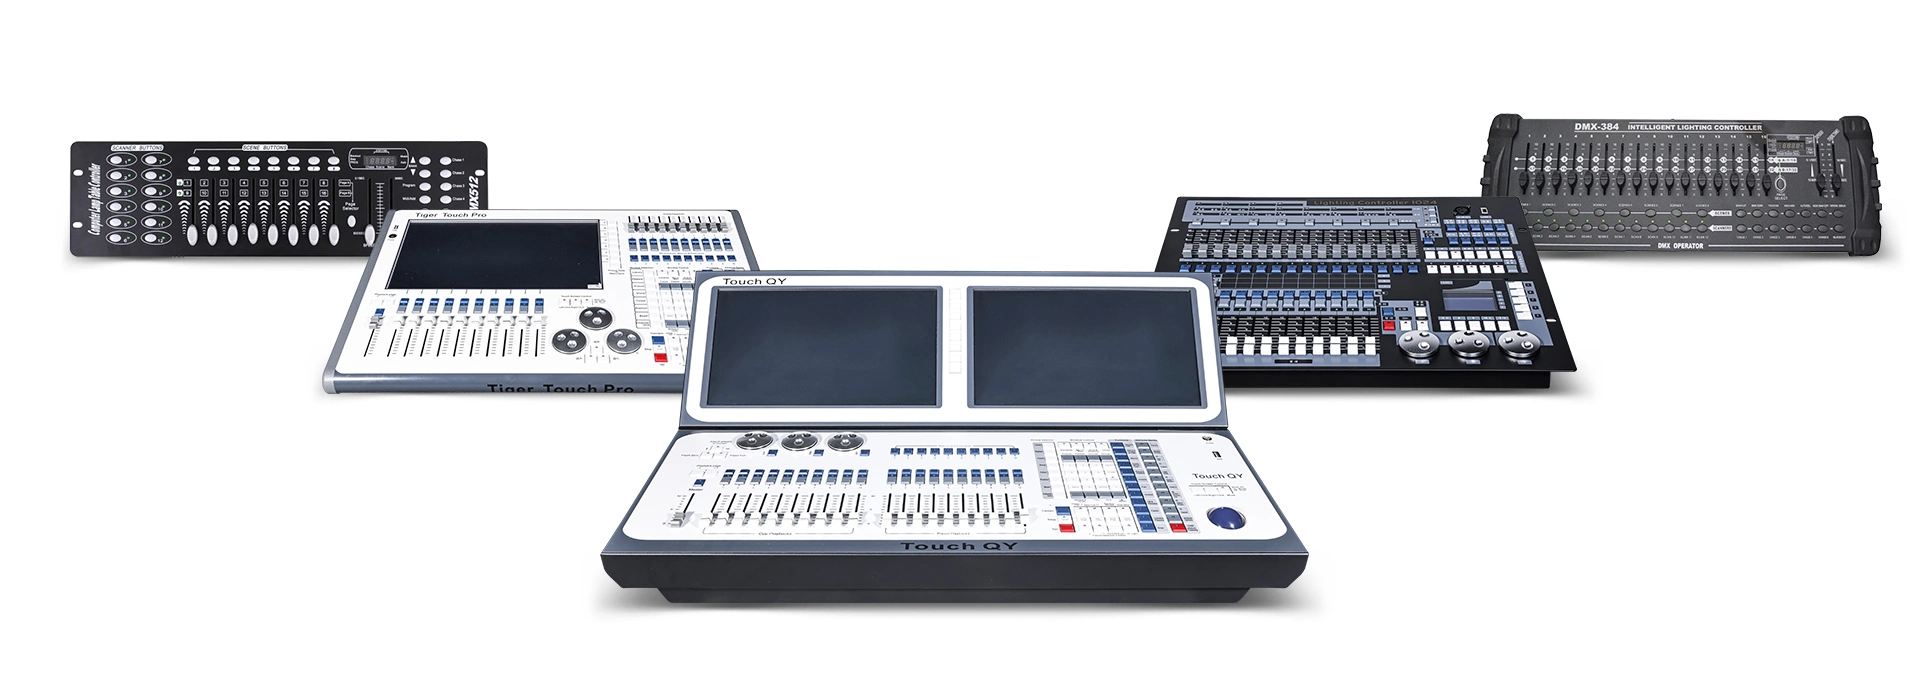 Advanced Lighting Control Consoles for Professional Stage Lighting Management